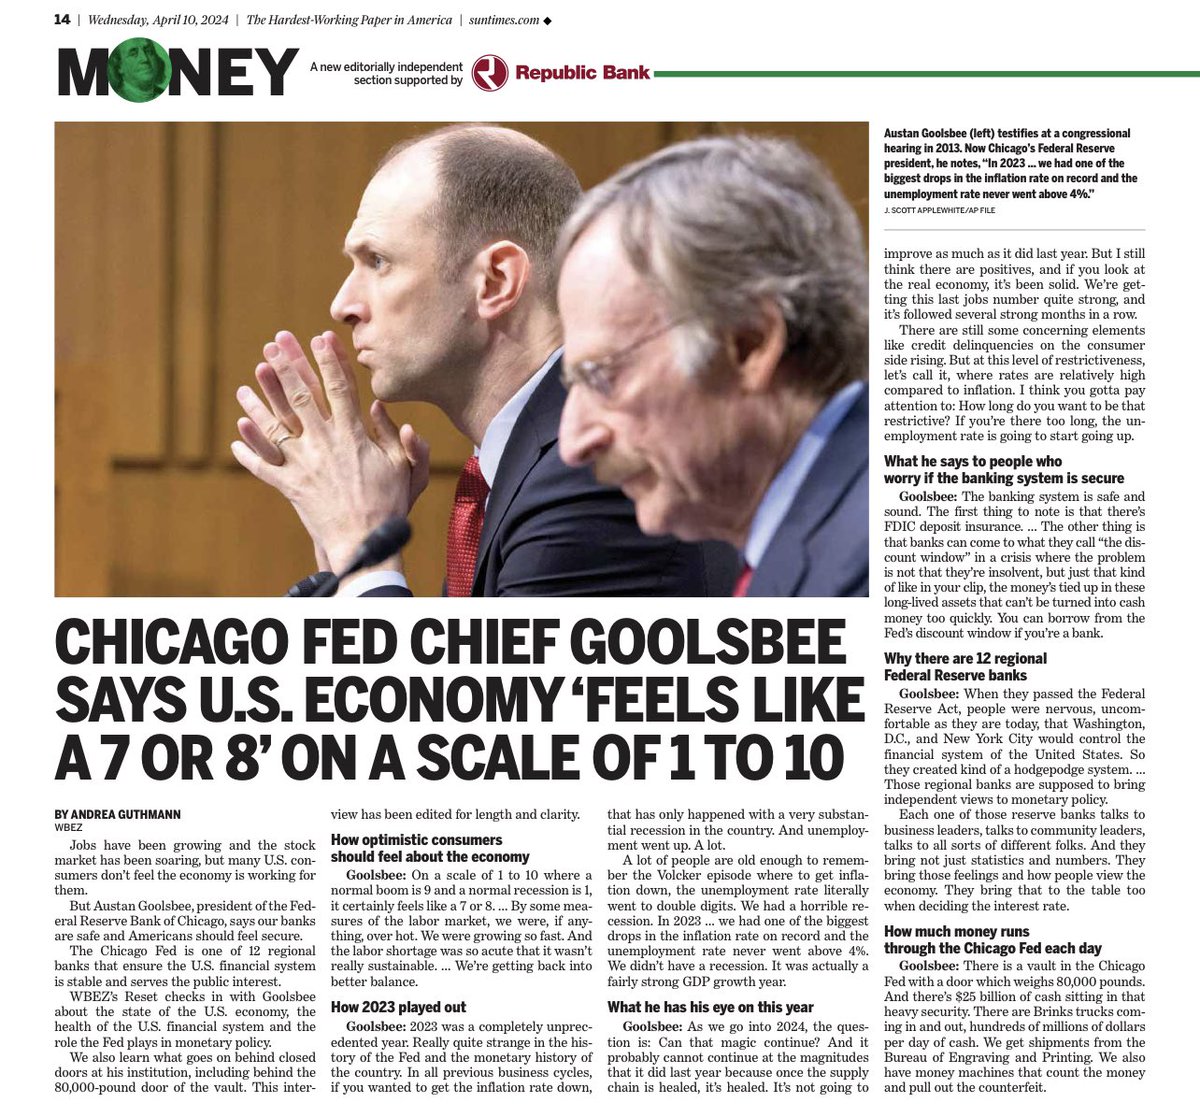 Nice @WBEZ interview with @ChicagoFed President @Austan_Goolsbee discussing what he’s watching w the economy in 2024 and how there’s $25B in cash sitting in the Fed vault on LaSalle St on any given day for eventual circulation!